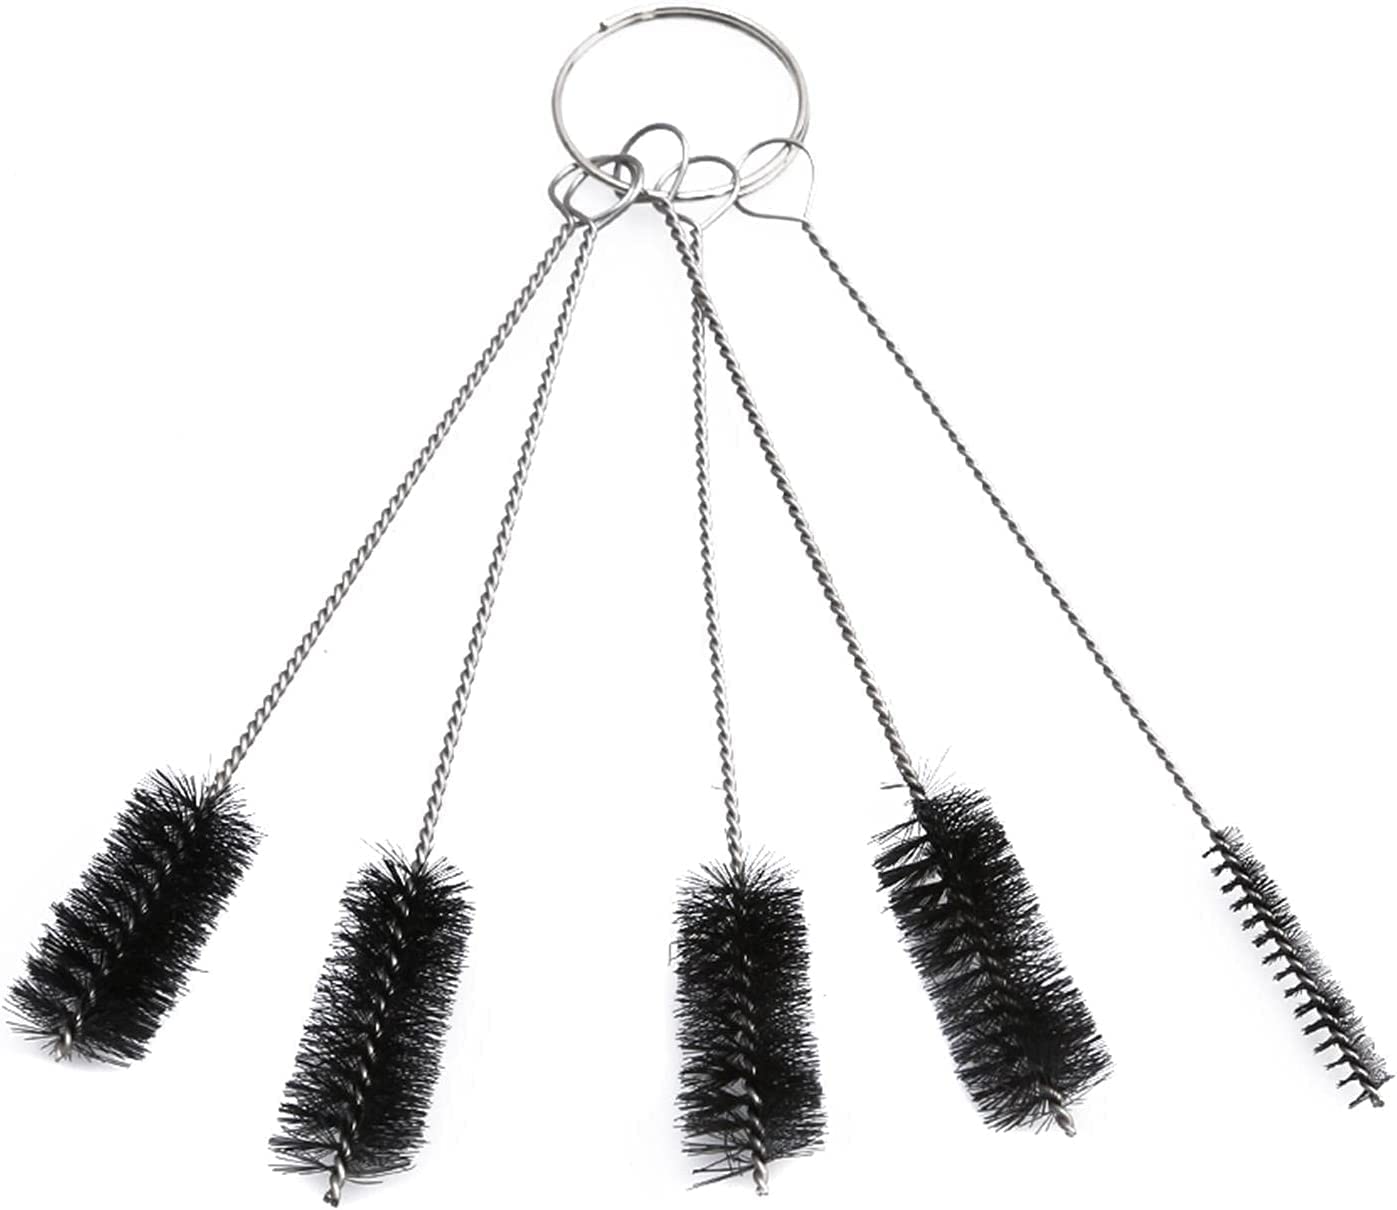 Small Pipe Cleaners, Nylon Brushes for Cleaning, Small Cleaning Brush Set for Cleaning Cleaning Brush Nice Design